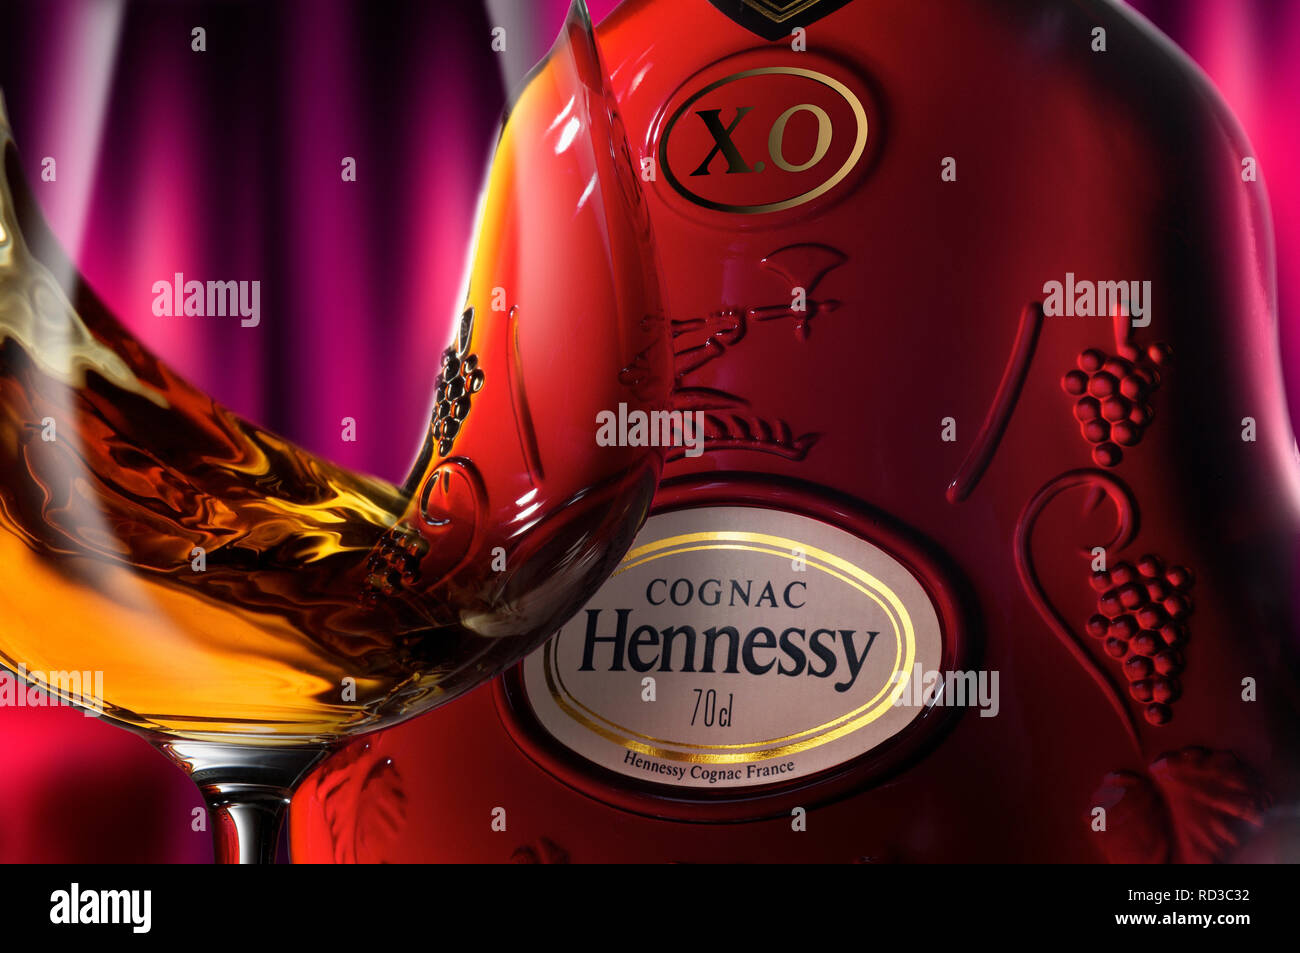 Moet Hennessy Price Book February 2021